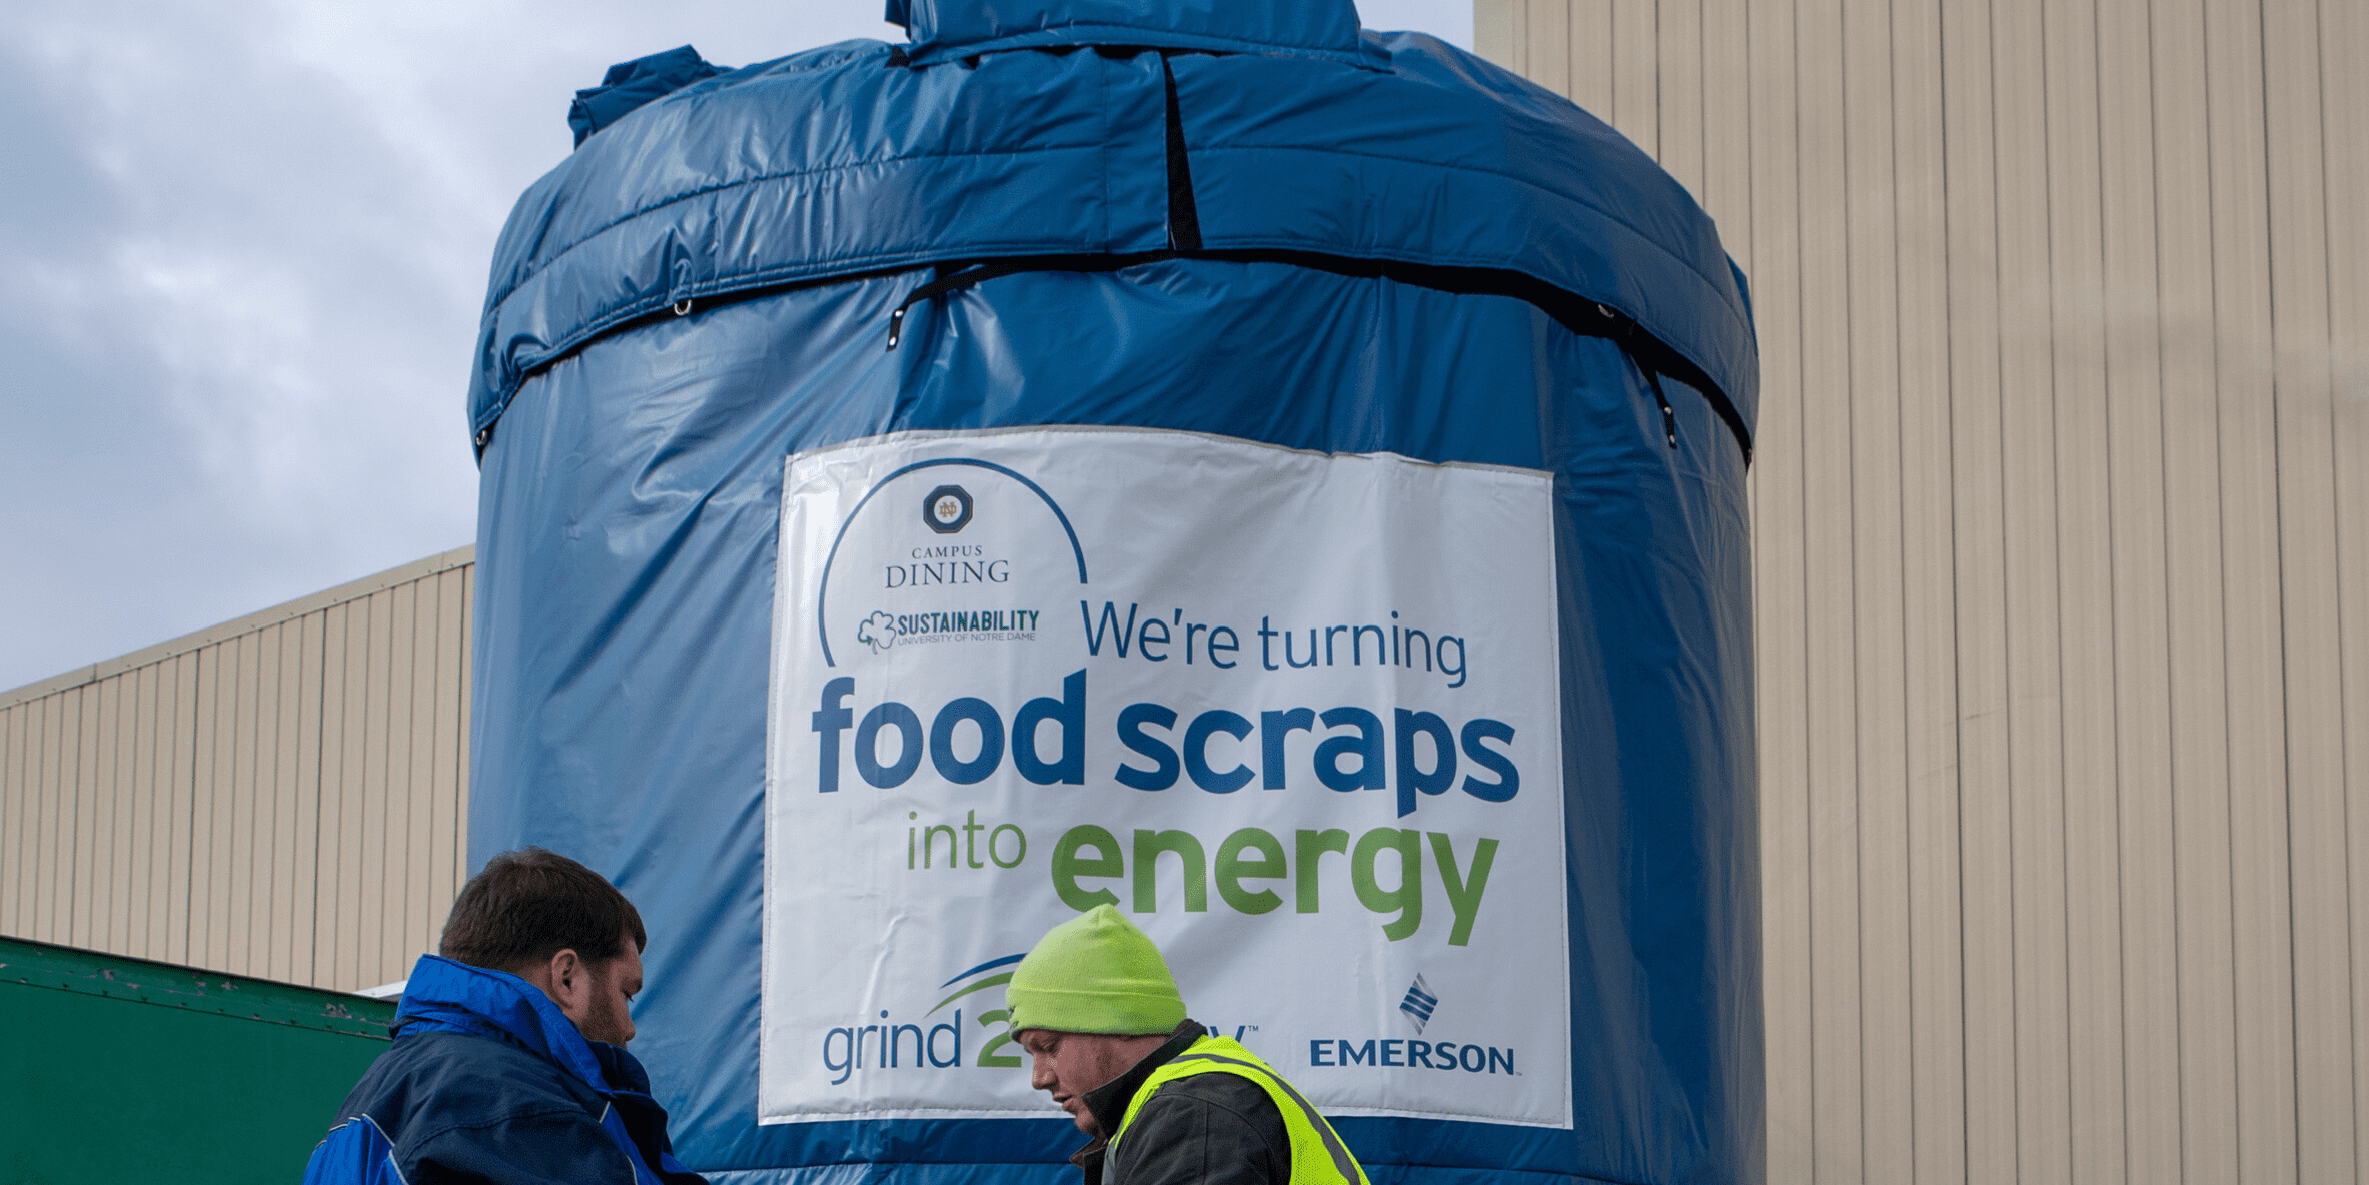 New system to tackle nonconsumable food waste, contribute to clean energy needs of local farm